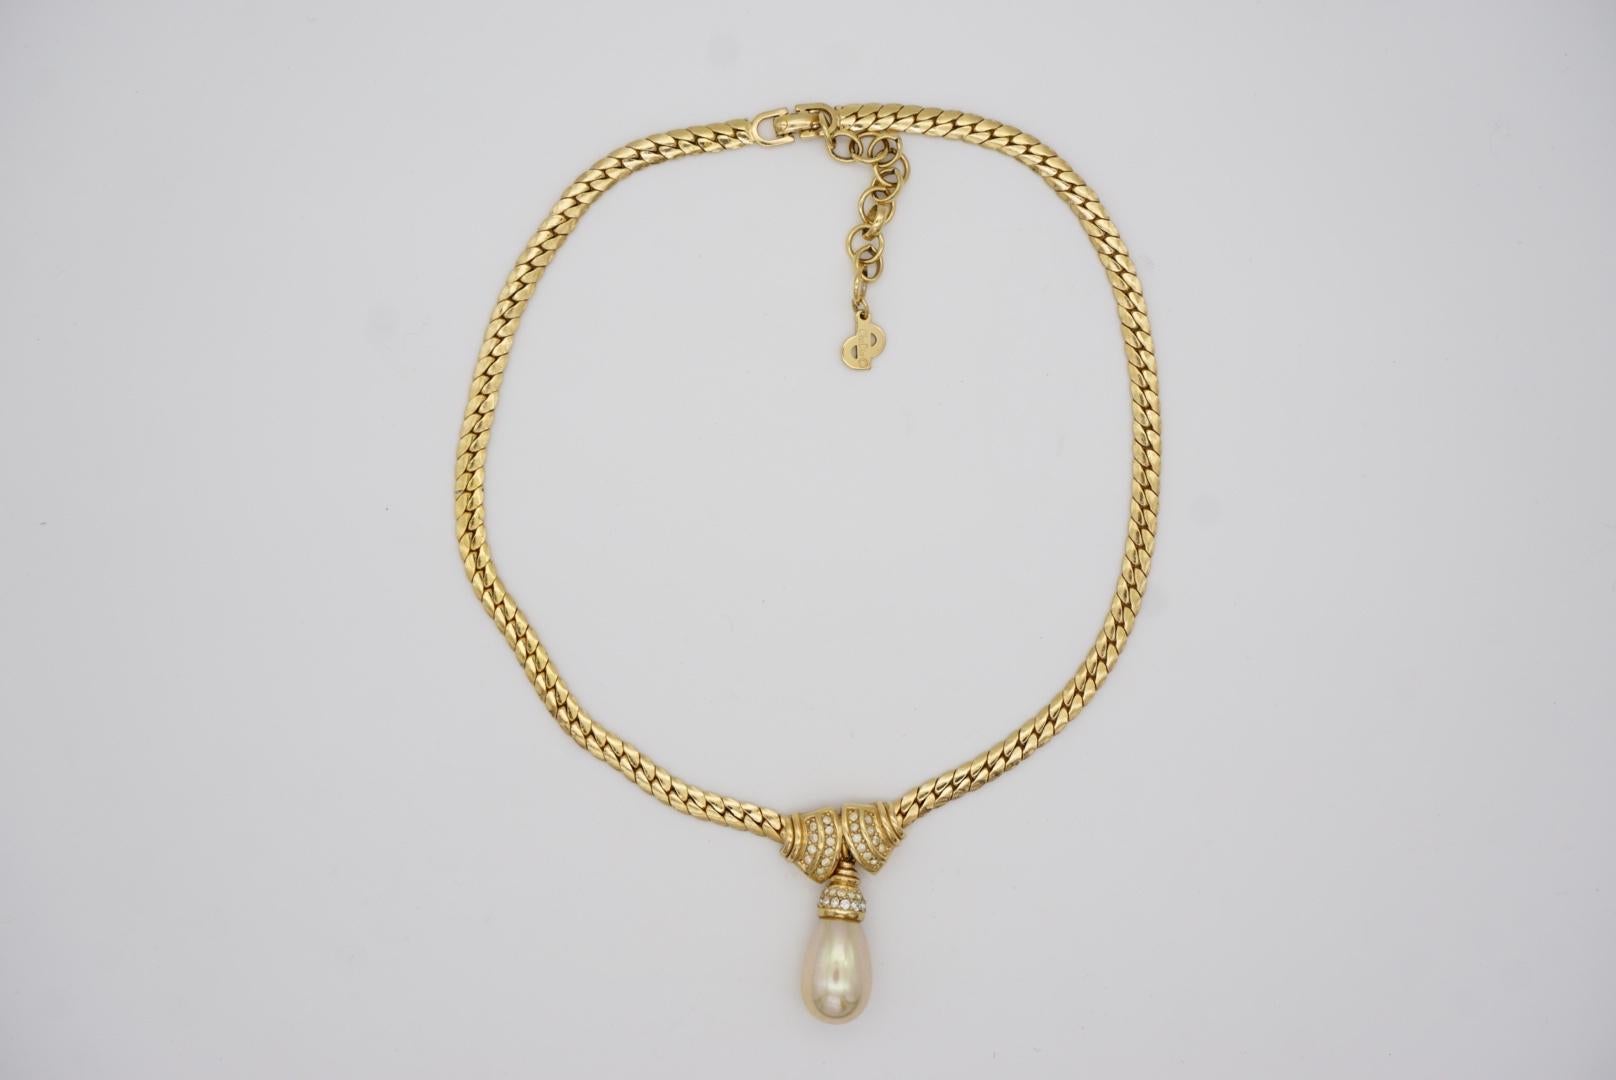 Christian Dior Vintage 1980s Faux Crystals Pearl Teardrop Gold Pendant Necklace In Excellent Condition For Sale In Wokingham, England